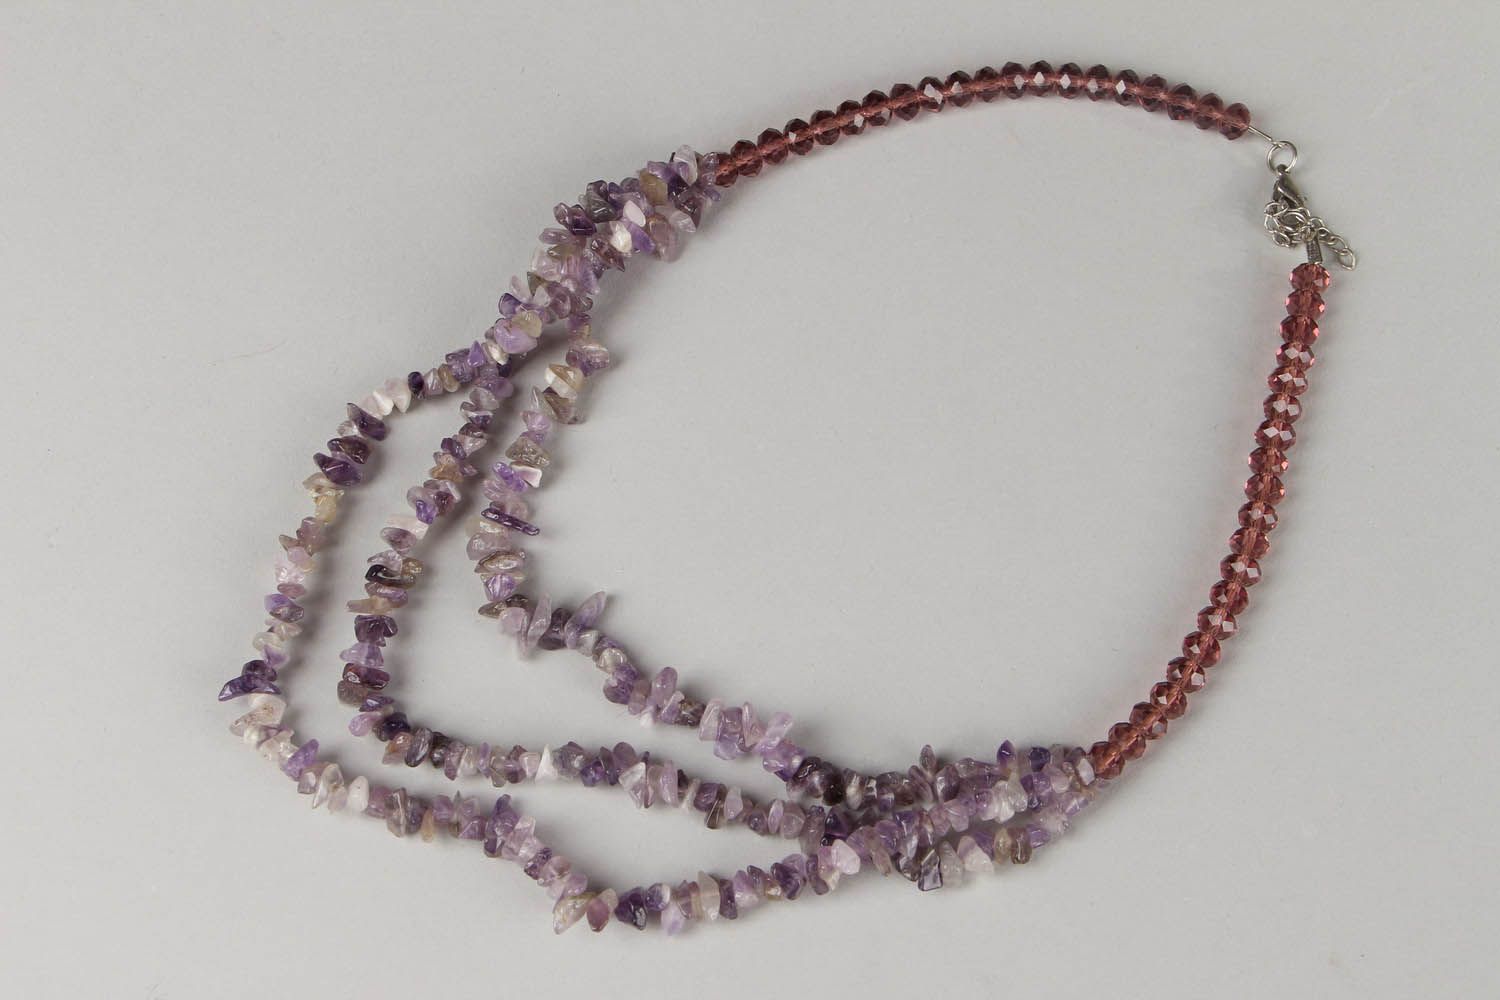 Bead necklace made of amethyst and glass photo 1